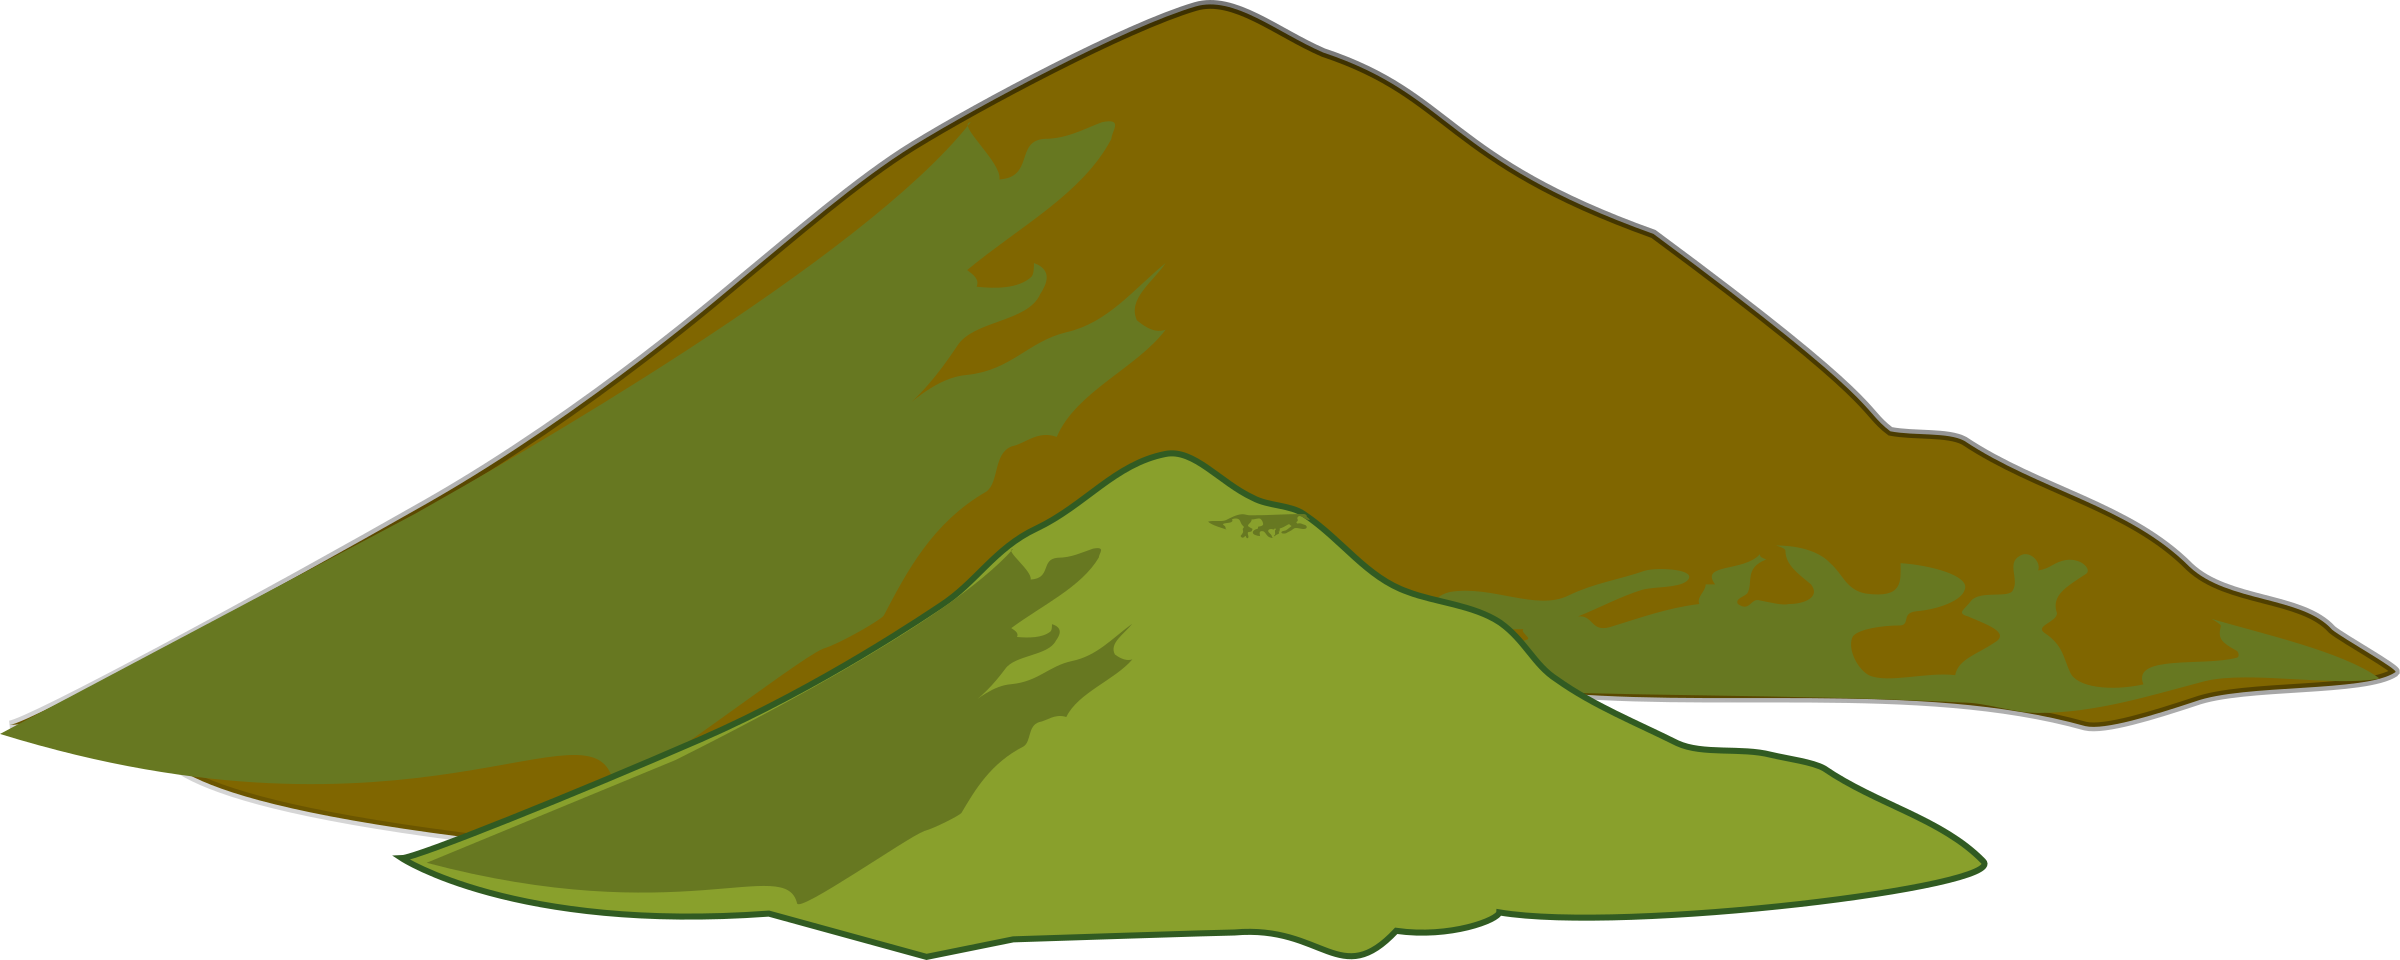 A Green Mountain With A Black Background